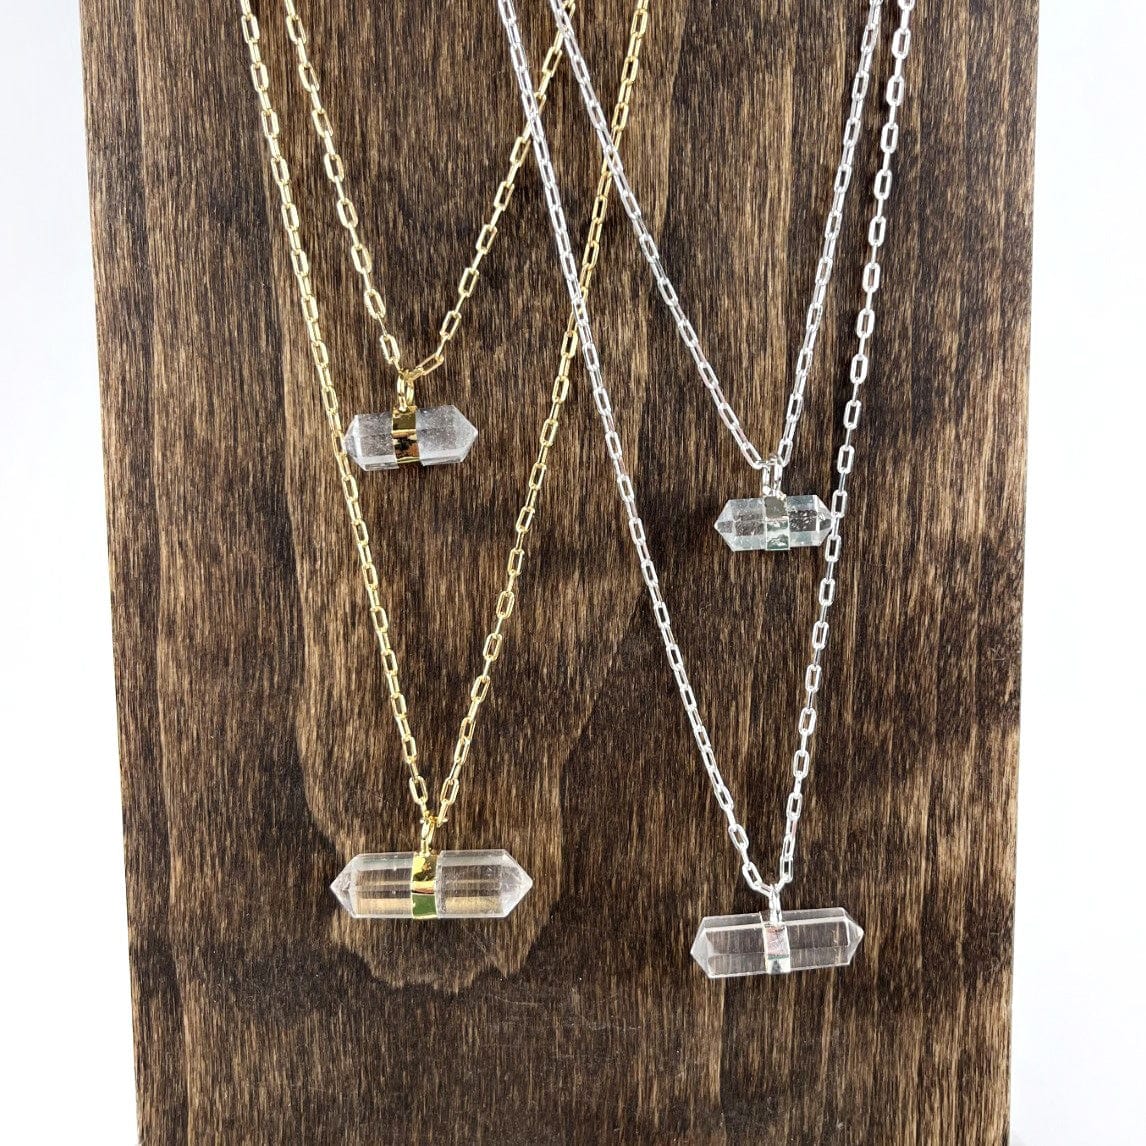 Crystal Point Necklaces in gold and silver